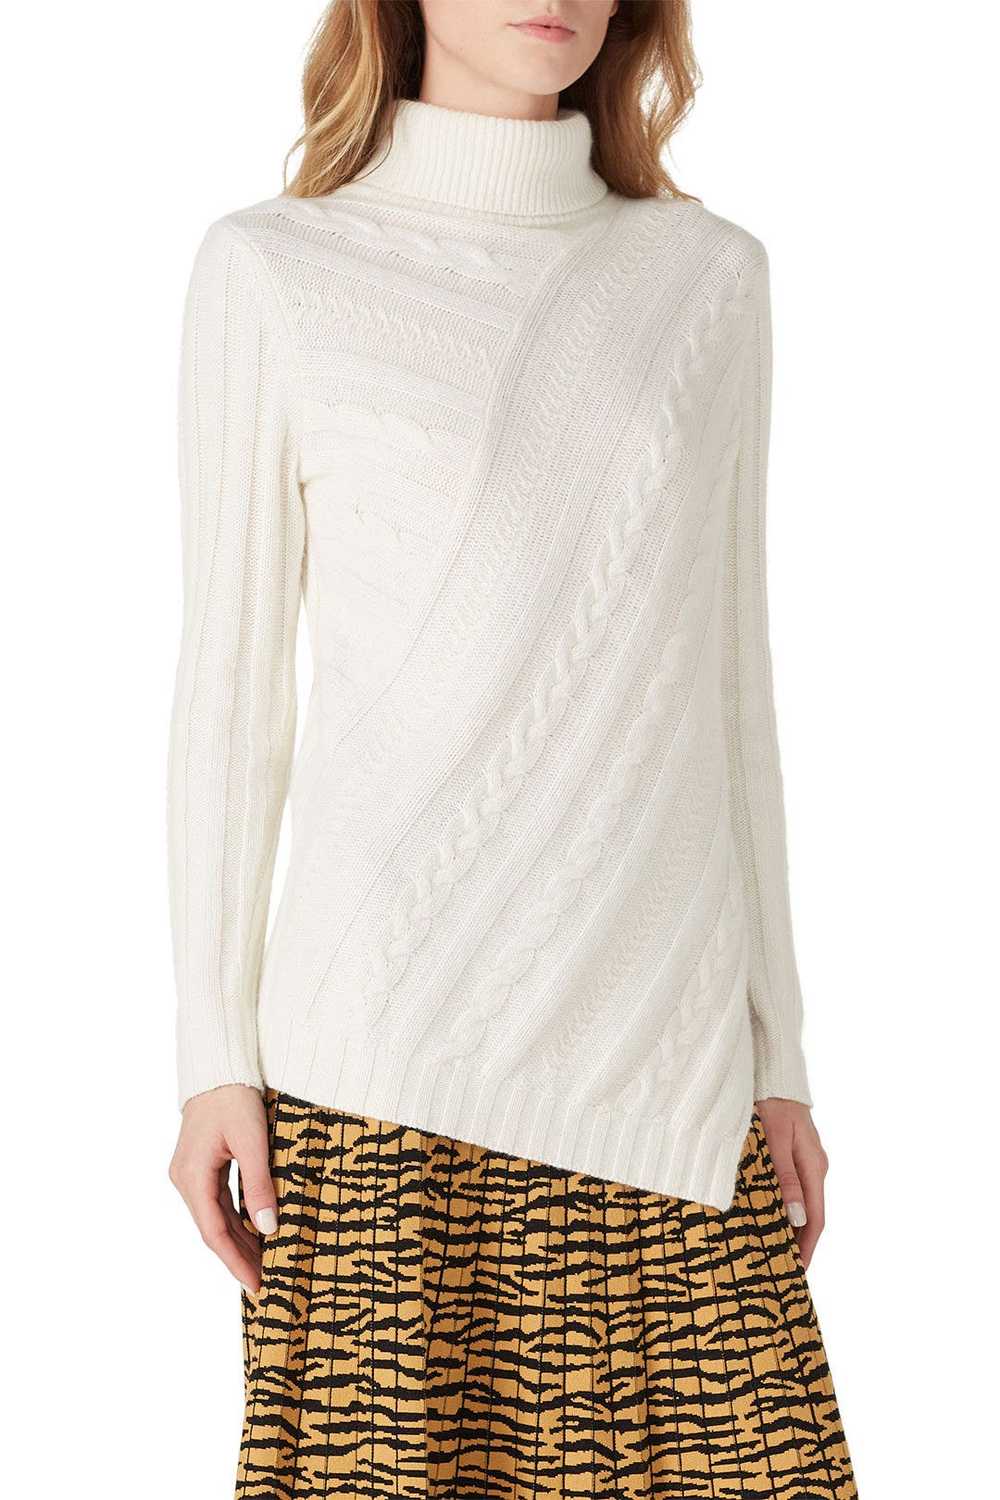 Milly Asymmetrical Cable Sweater - image 2